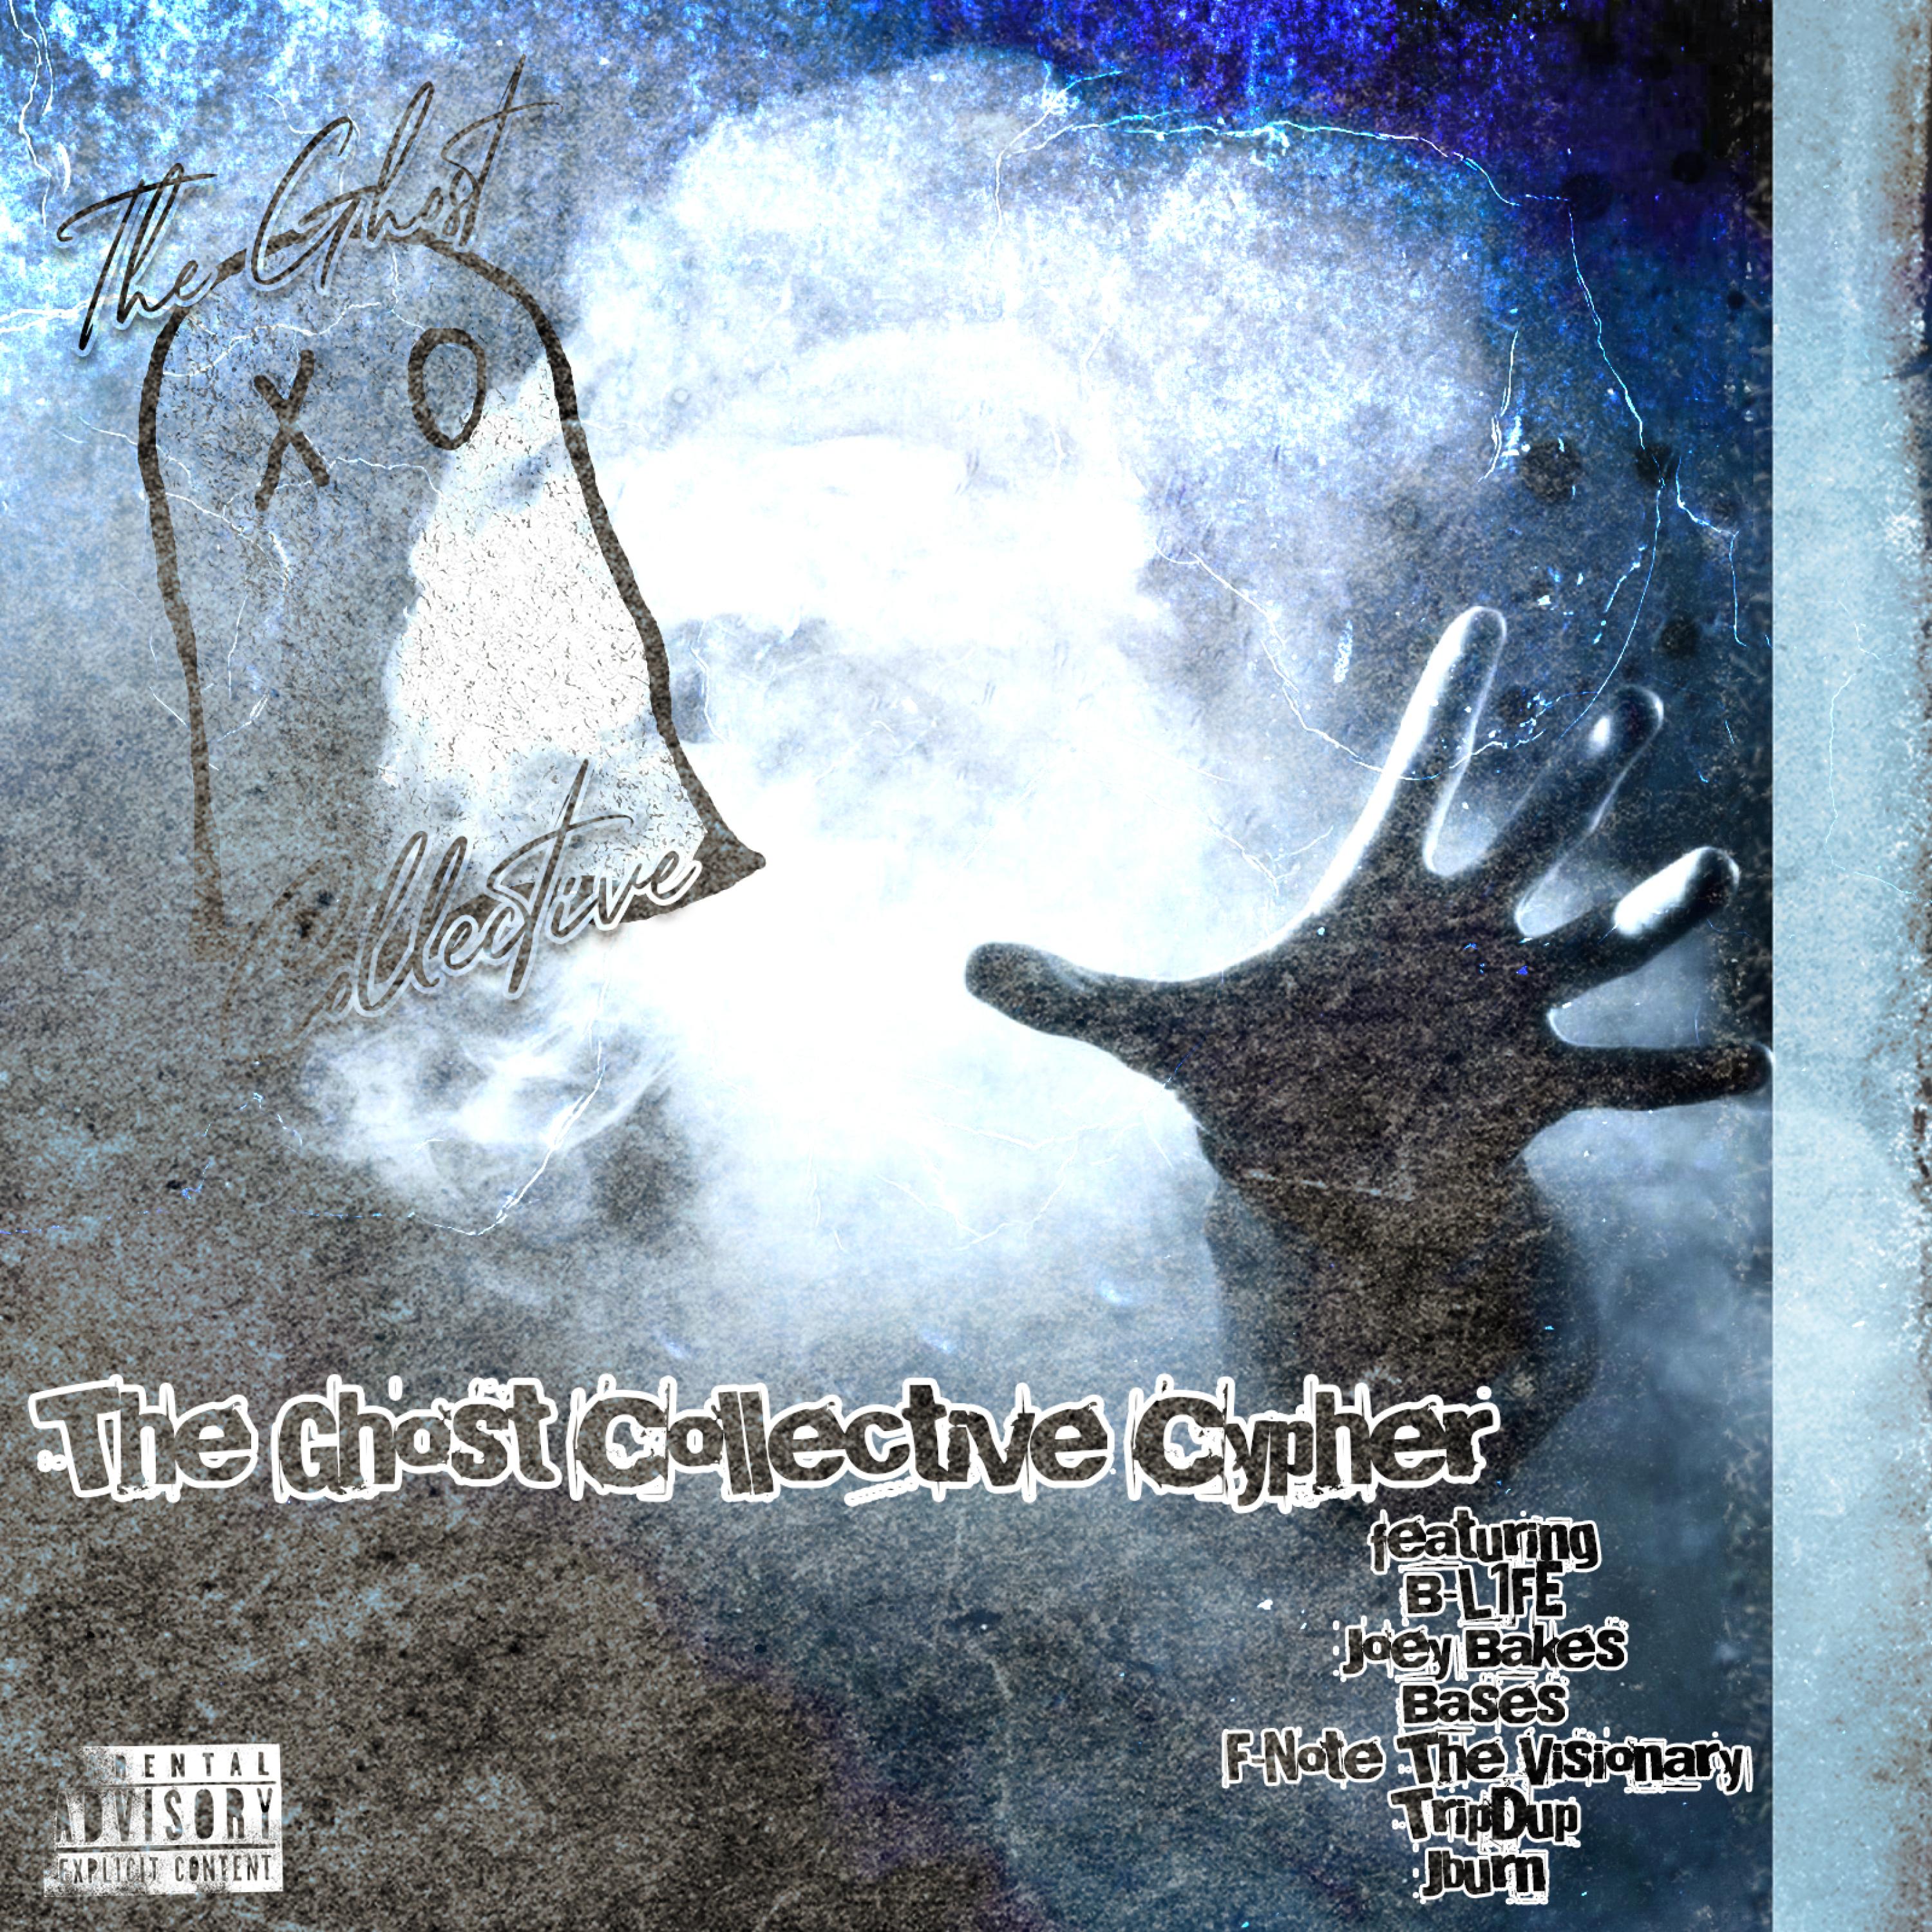 The Ghost Collective Cypher Vol. 1